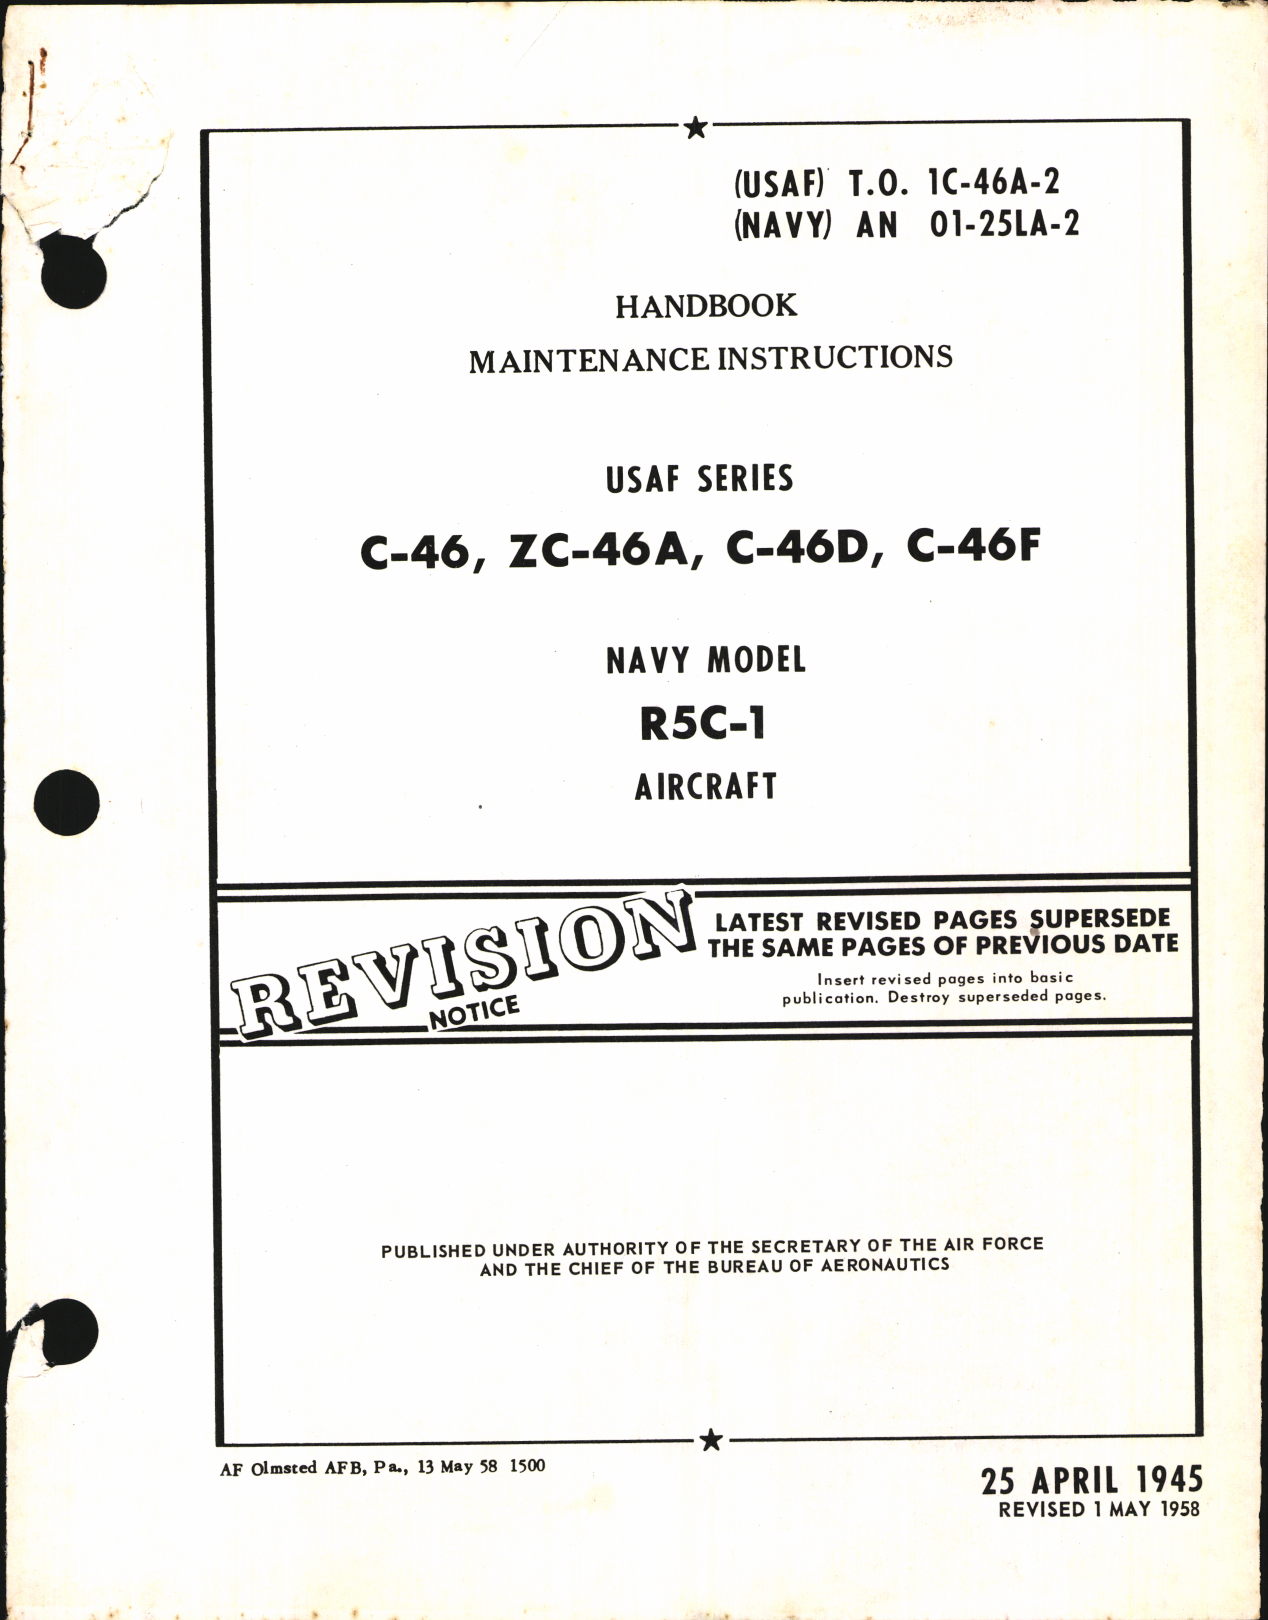 Sample page 1 from AirCorps Library document: Maintenance Instructions for C-46, ZC-46A, C-46D, C-46F, and R5C-1